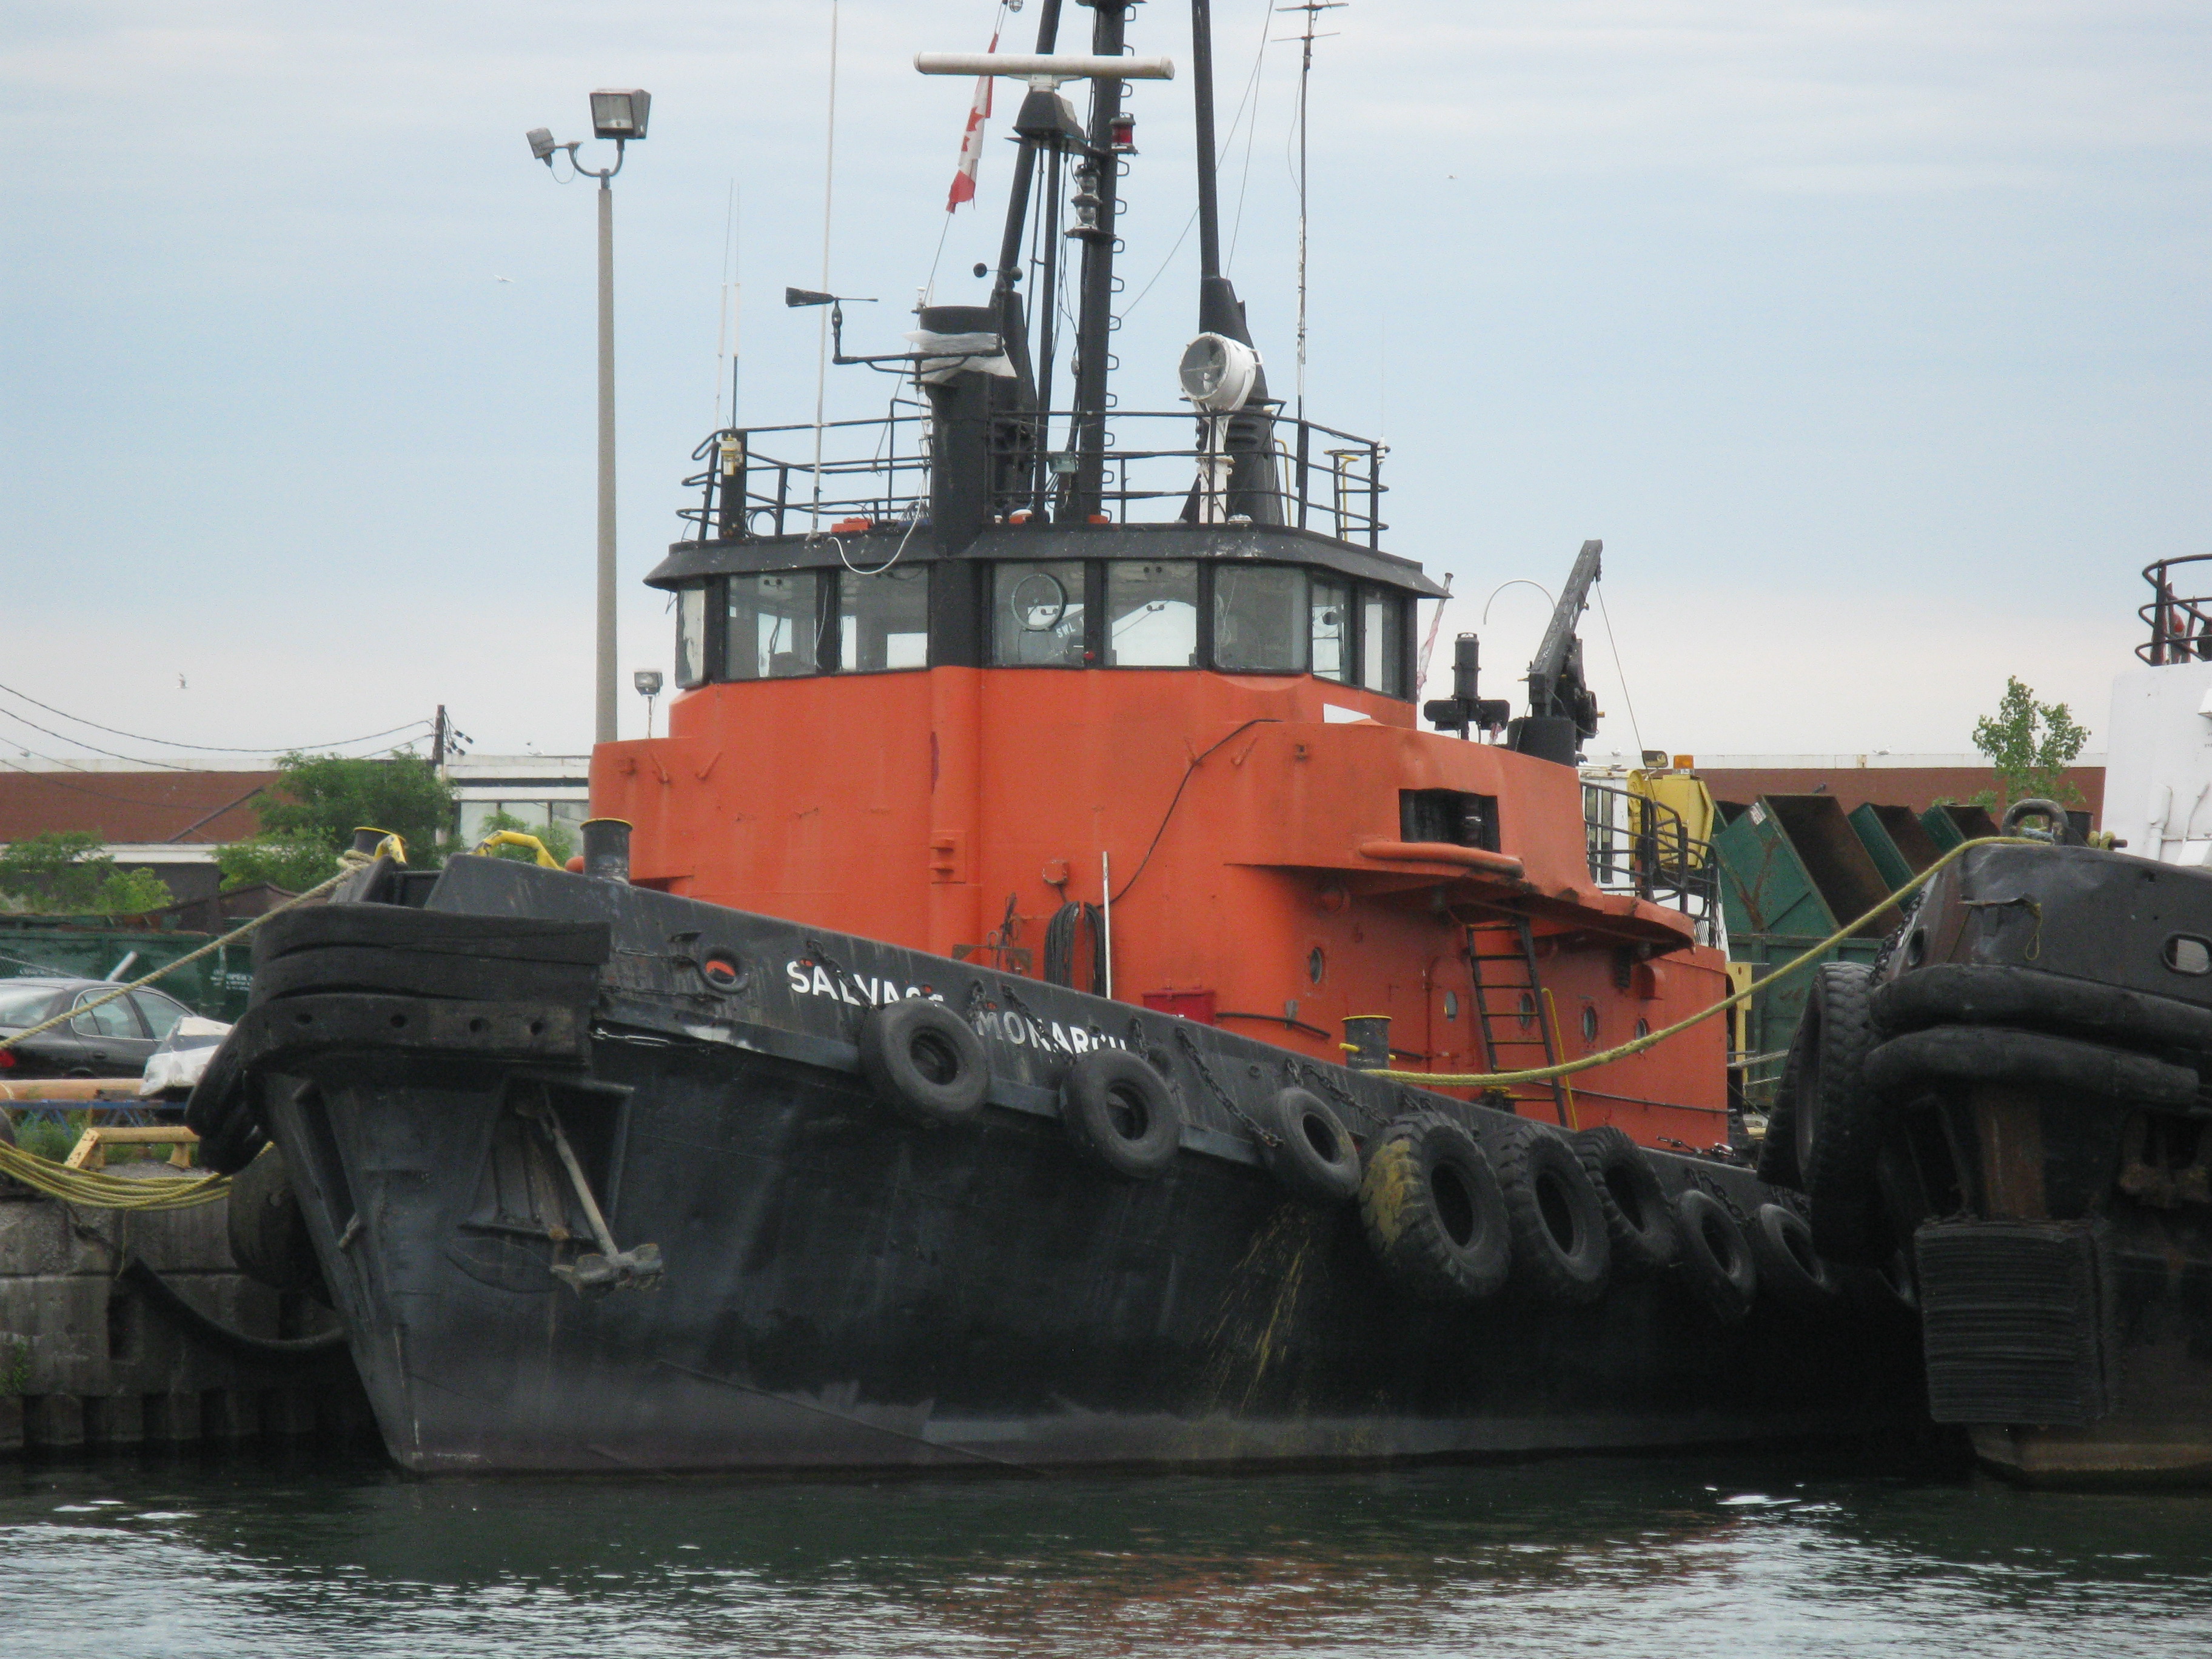 A tug moored in the keating channel -c.jpg photo